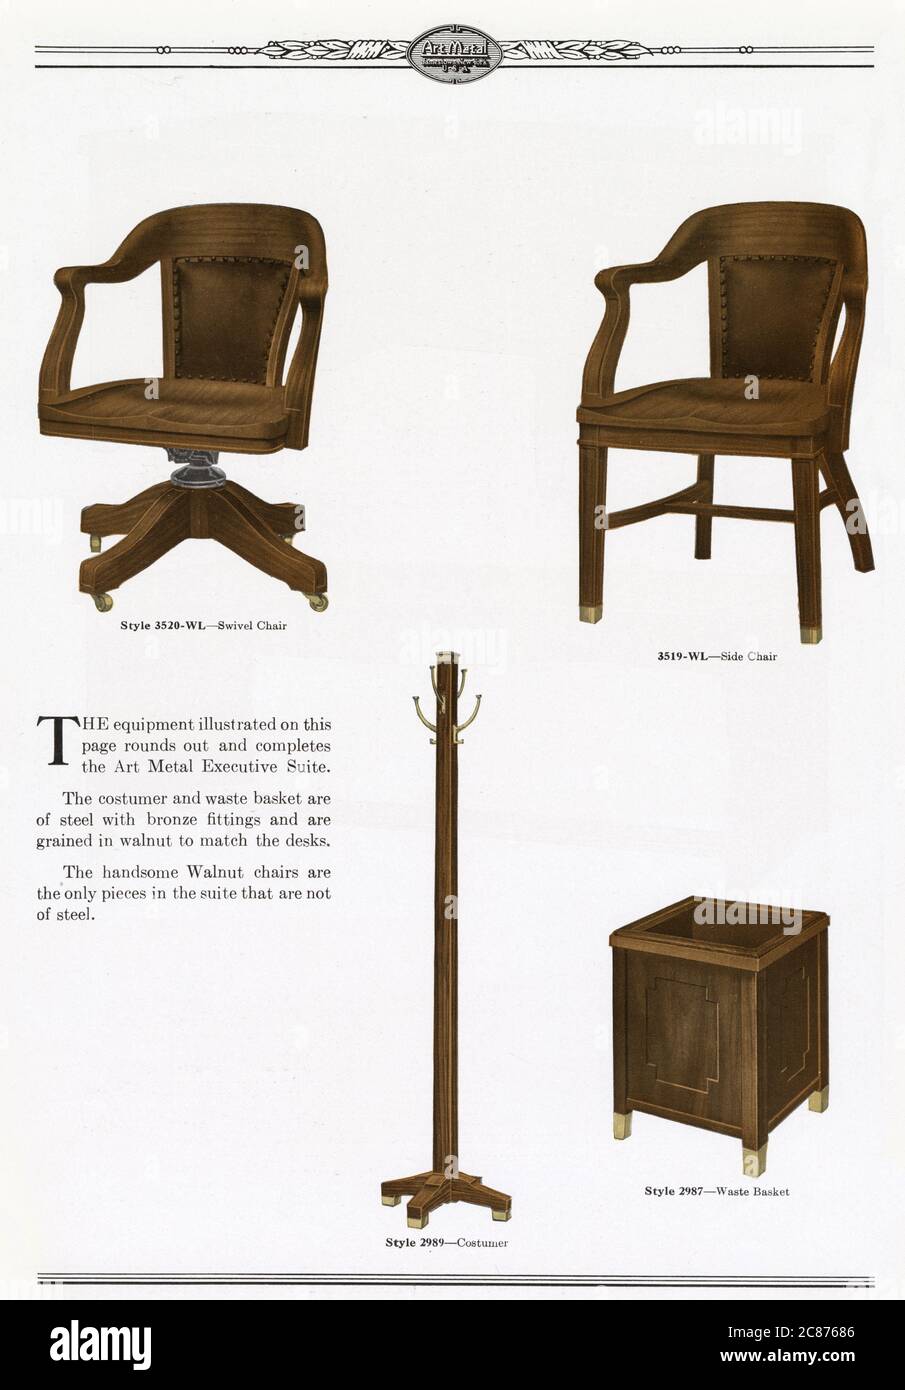 Art Metal Steel Office Equipment, Jamestown, New York, USA - Art Metal furniture for the Executive Office (Swivel Chair and Side Chair in walnut, Hat Stand and Waste Basket in steel with bronze fittings and walnut finish). Stock Photo